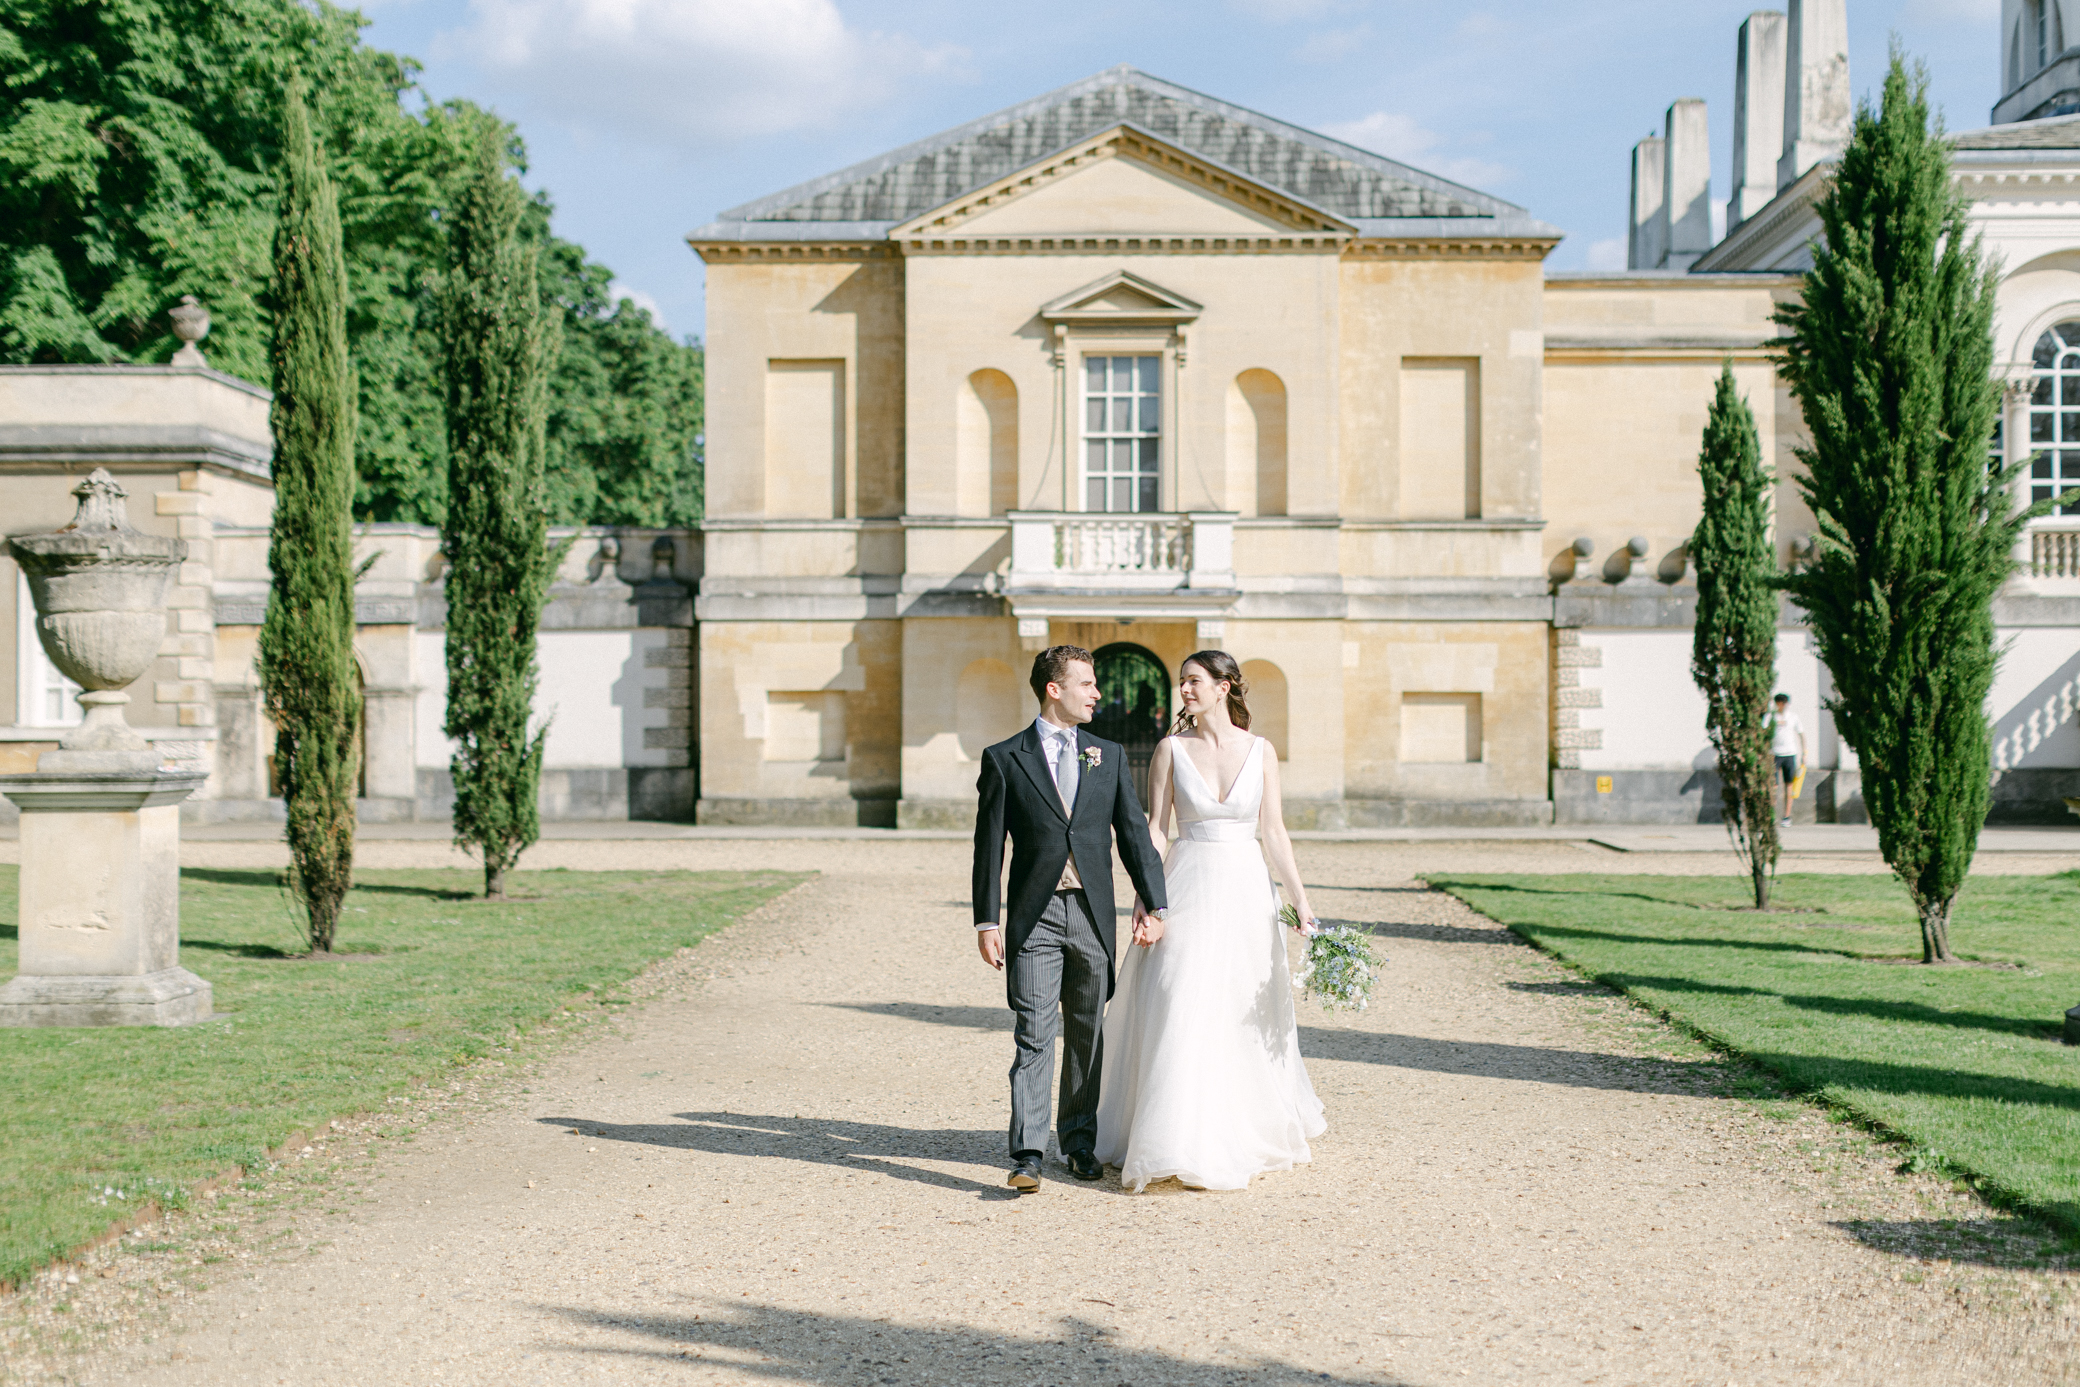 Classic couple walking through the grounds of Chiswick House and Gardens on their Wadding day